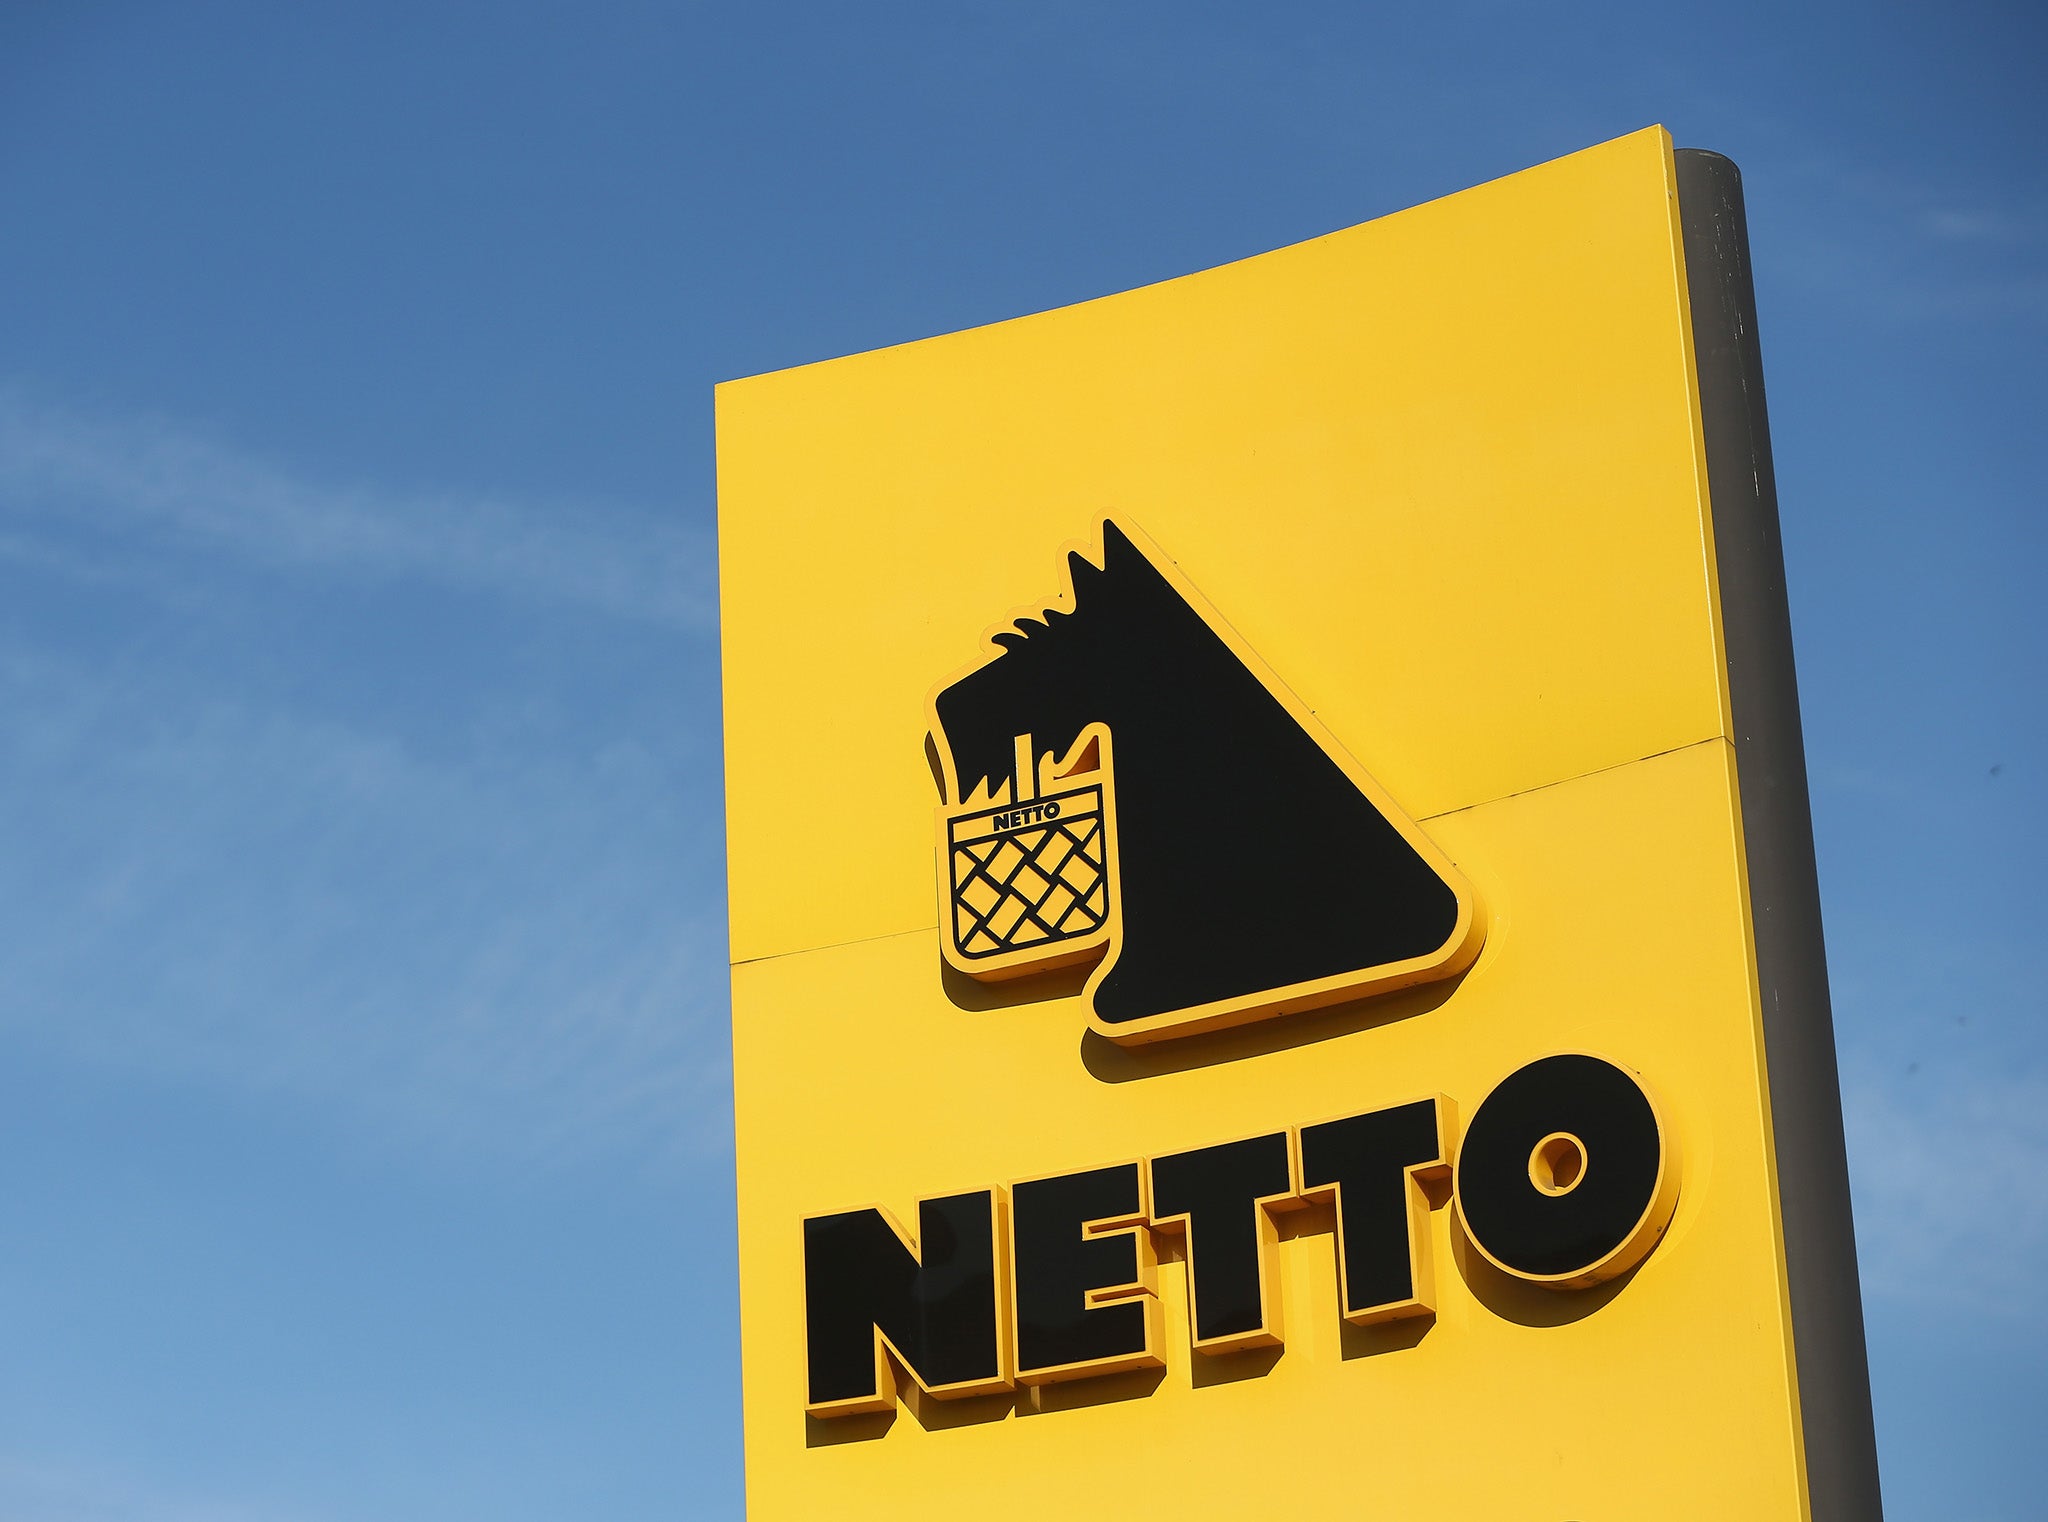 There are 16 Netto stores across the UK with 400 jobs put at risk by the closure of the chain